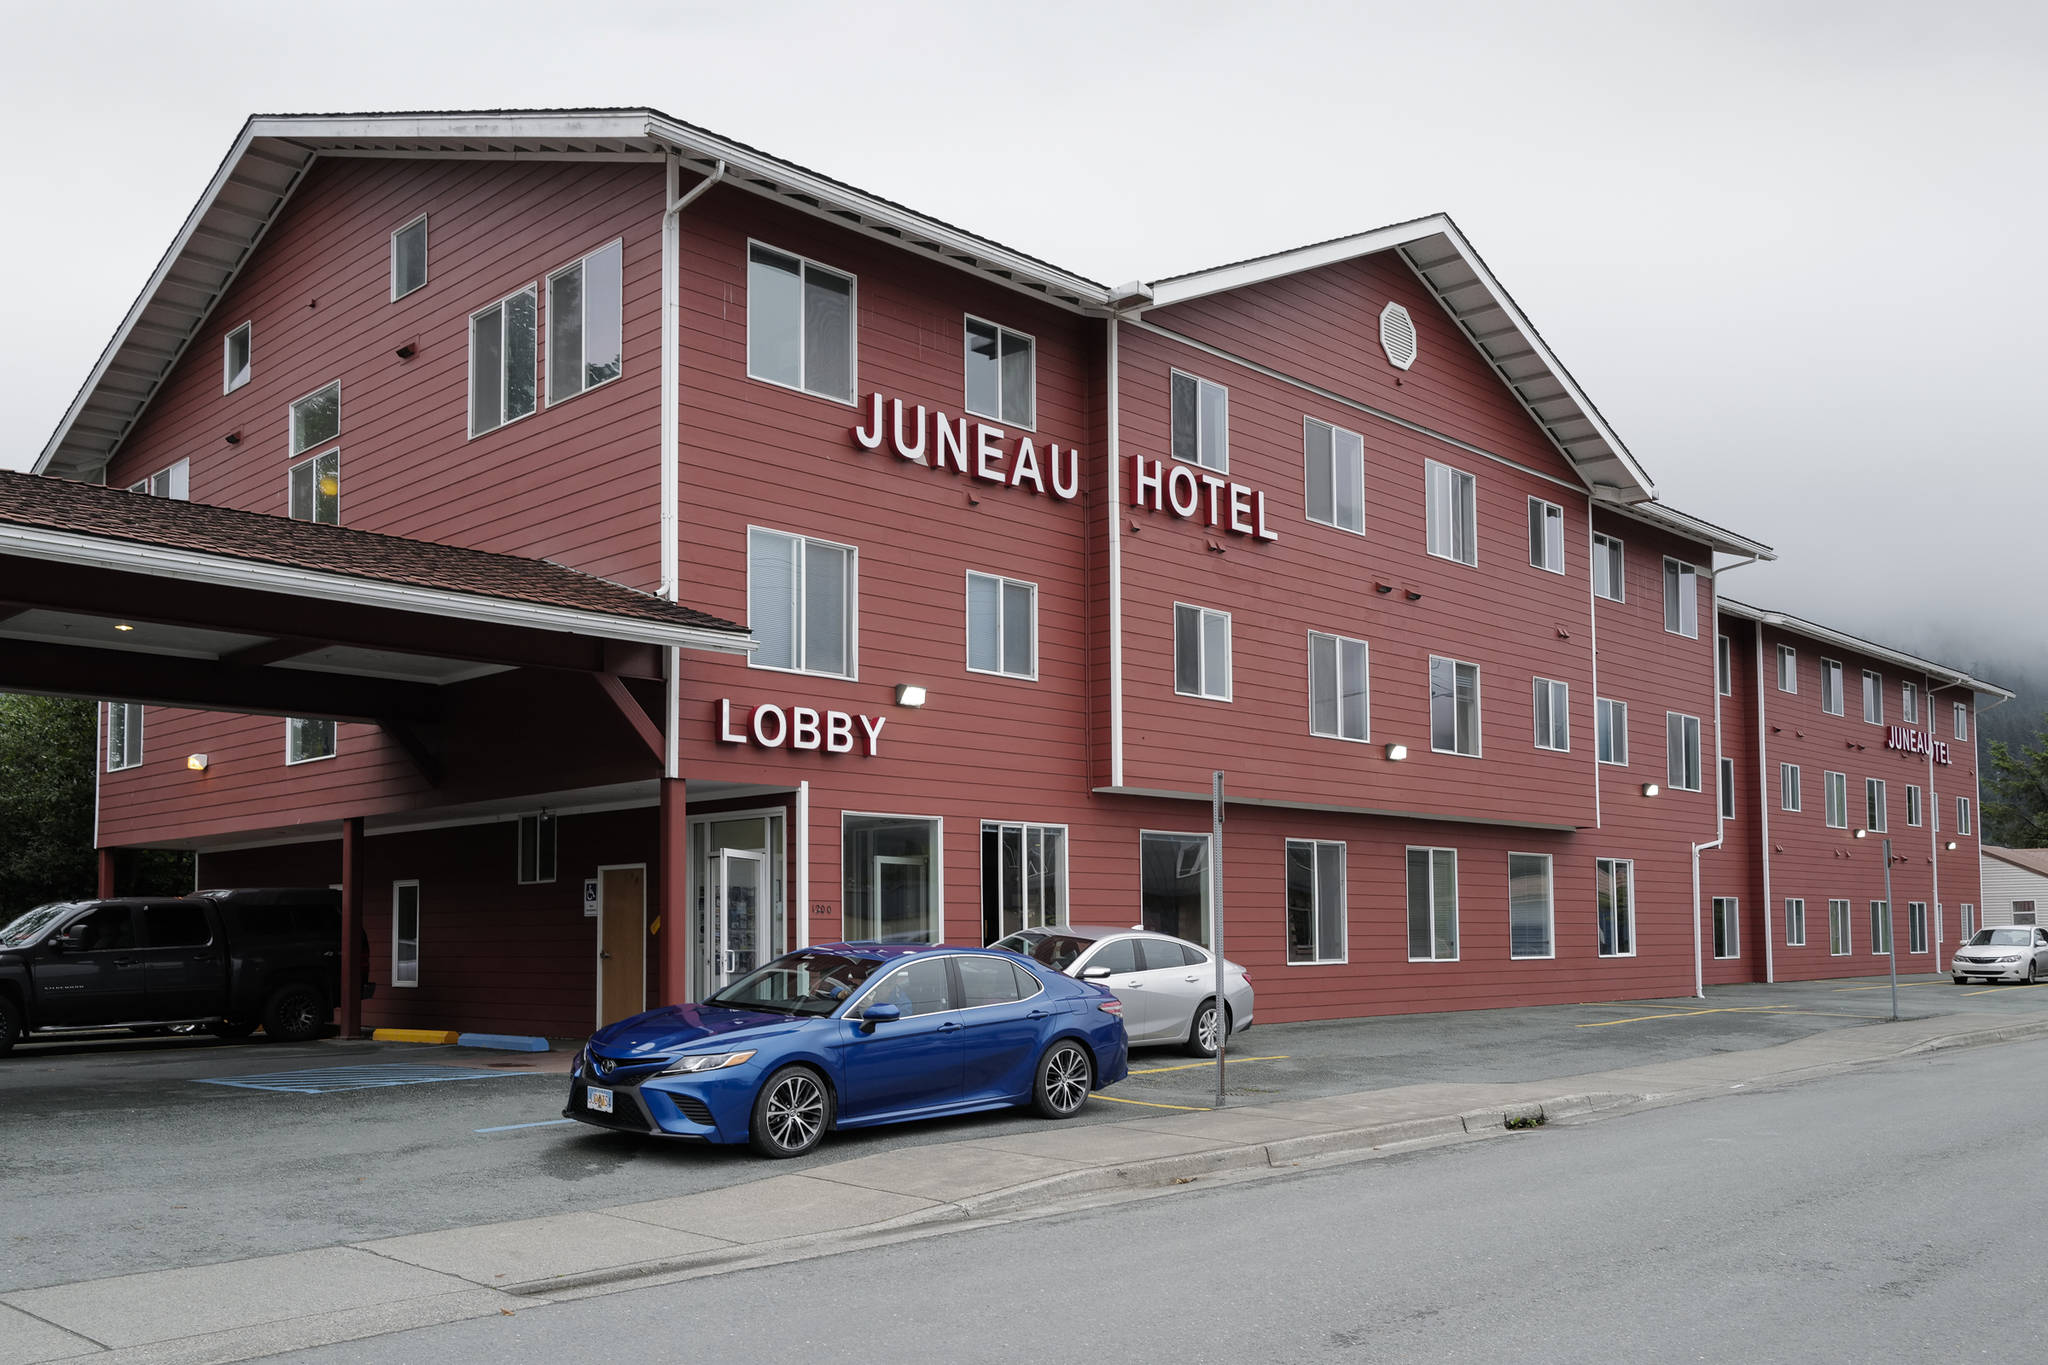 The Juneau Hotel is located on W. 9th Street off of Egan Drive in downtown Juneau. (Michael Penn | Juneau Empire)